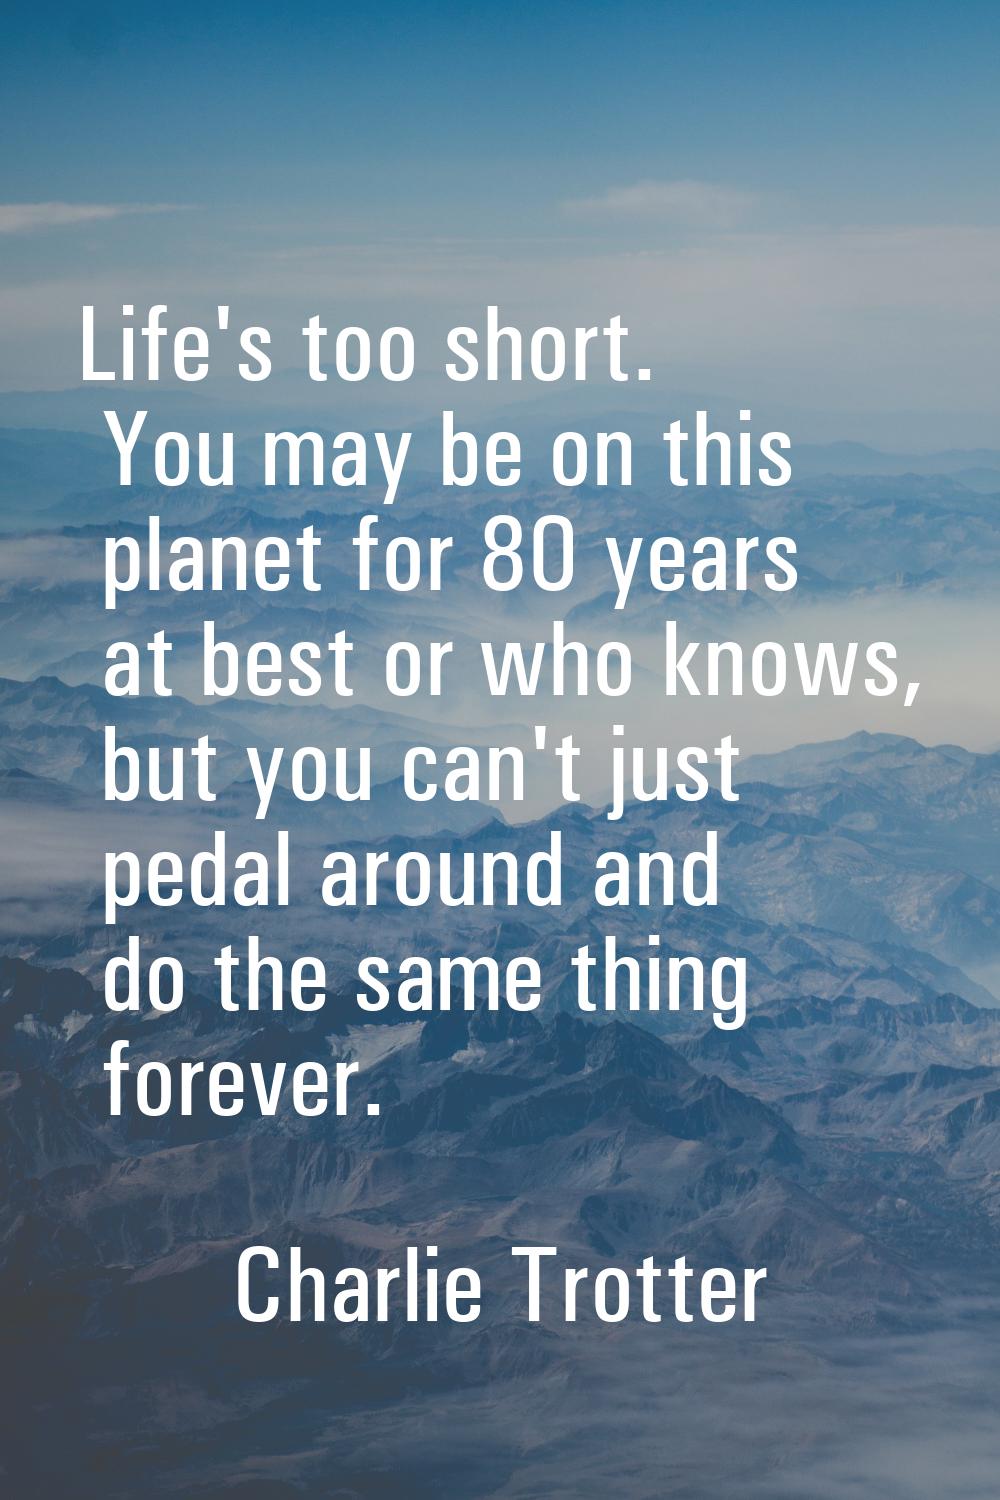 Life's too short. You may be on this planet for 80 years at best or who knows, but you can't just p